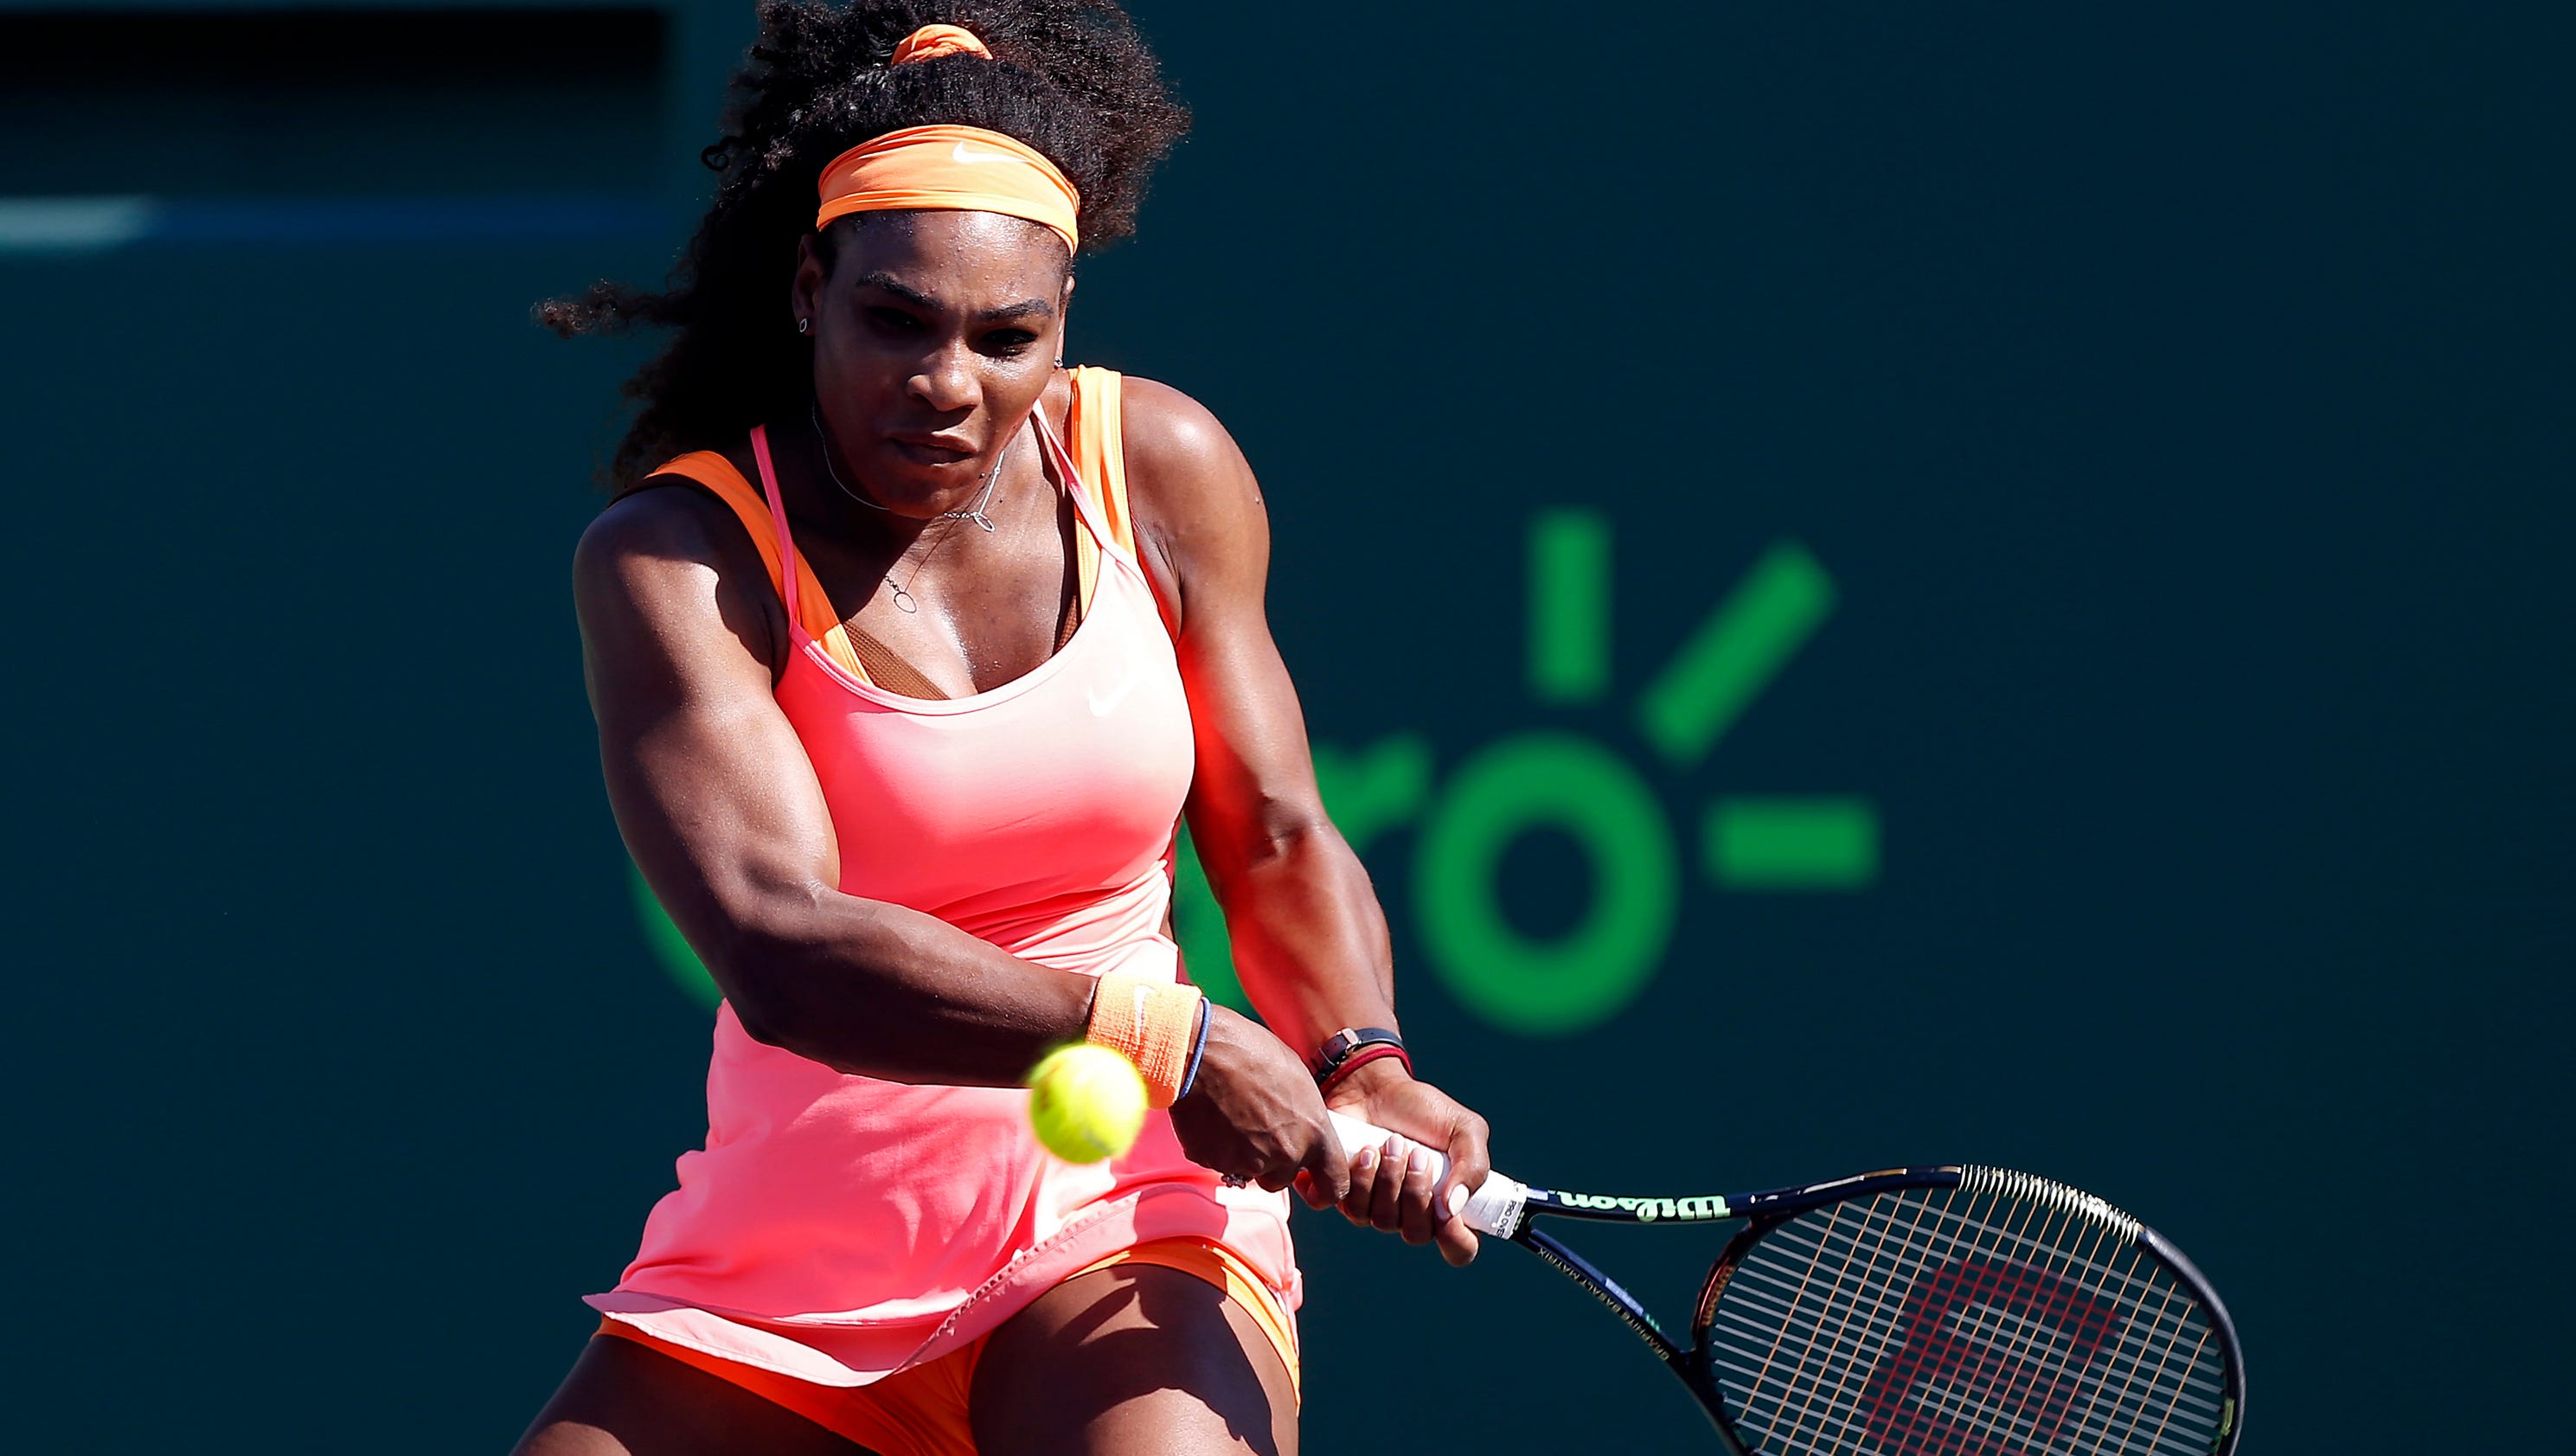 Serena William rolls by 15-year-old CiCi Bellis in 41 minutes at Miami